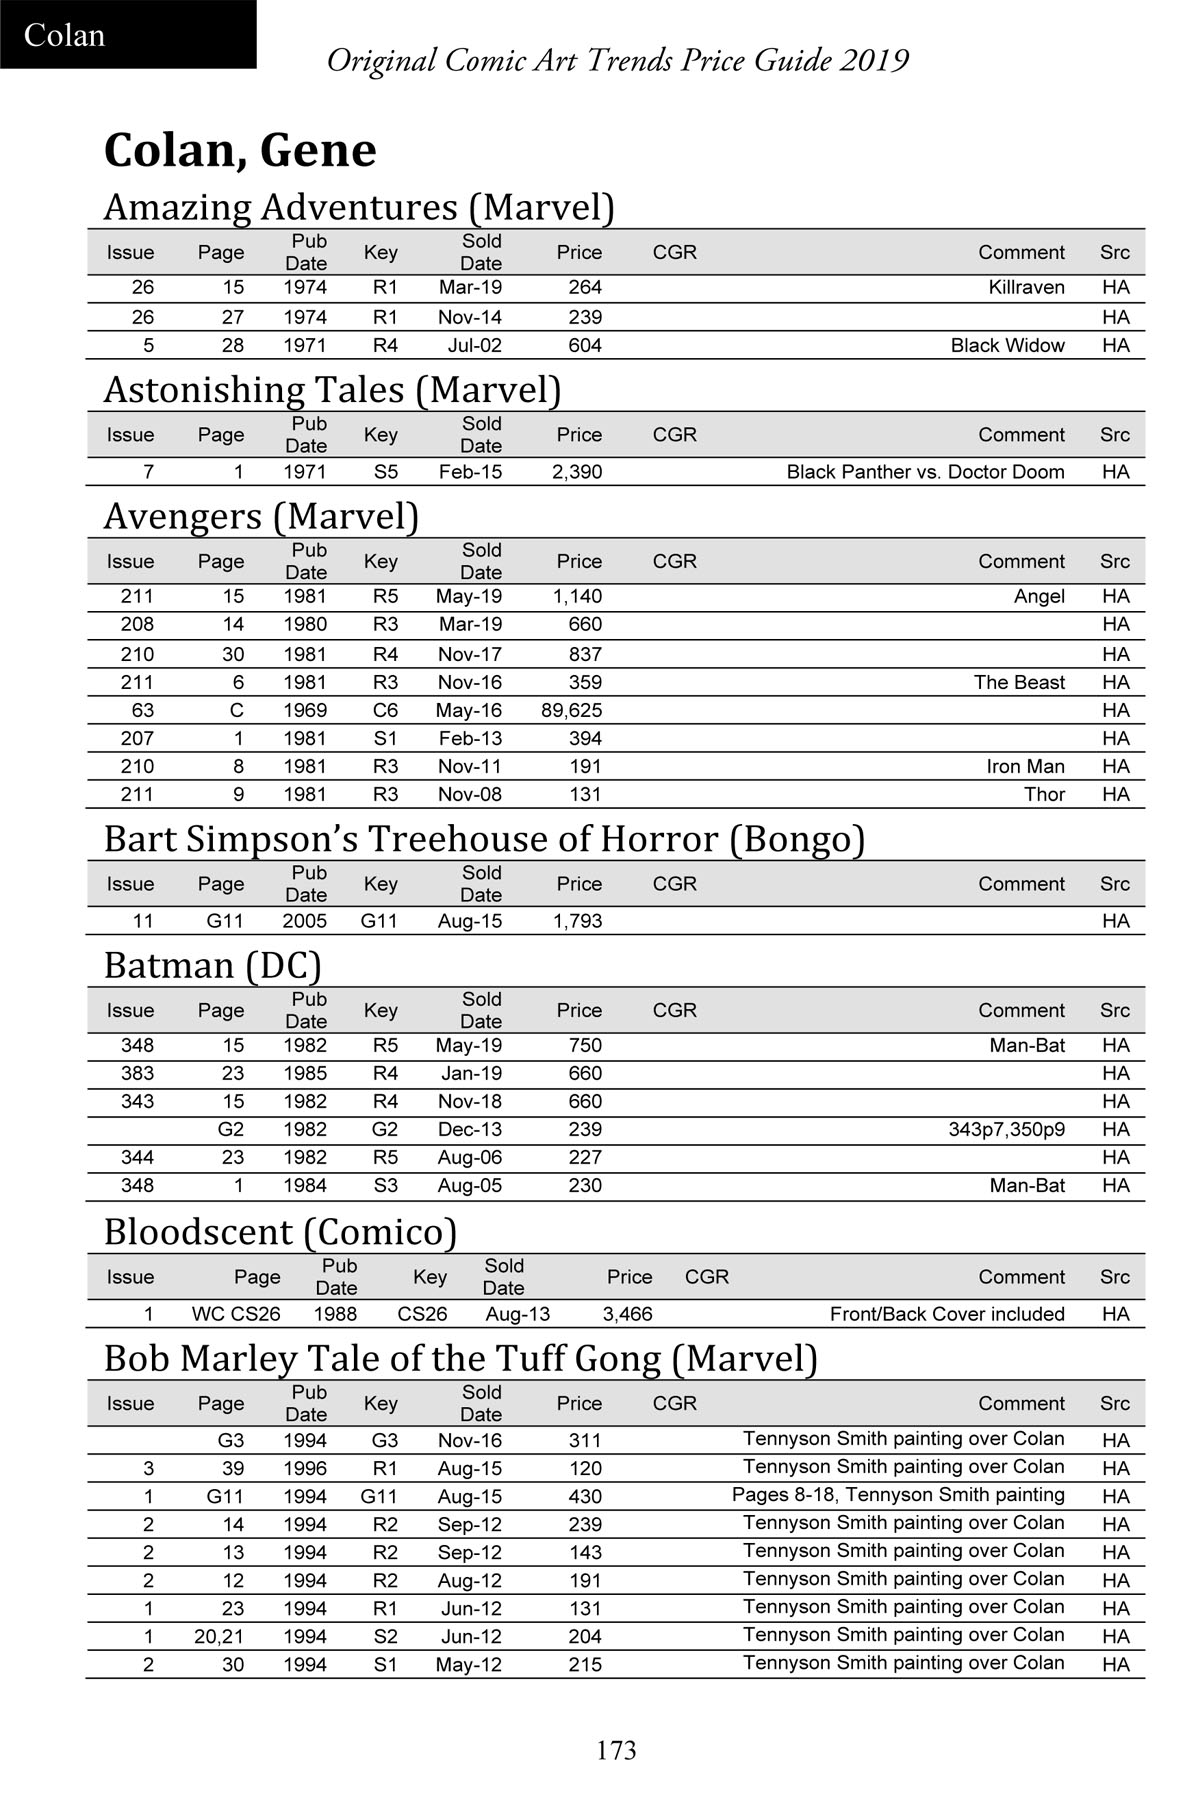 Comic Art Trends Price Guide Table